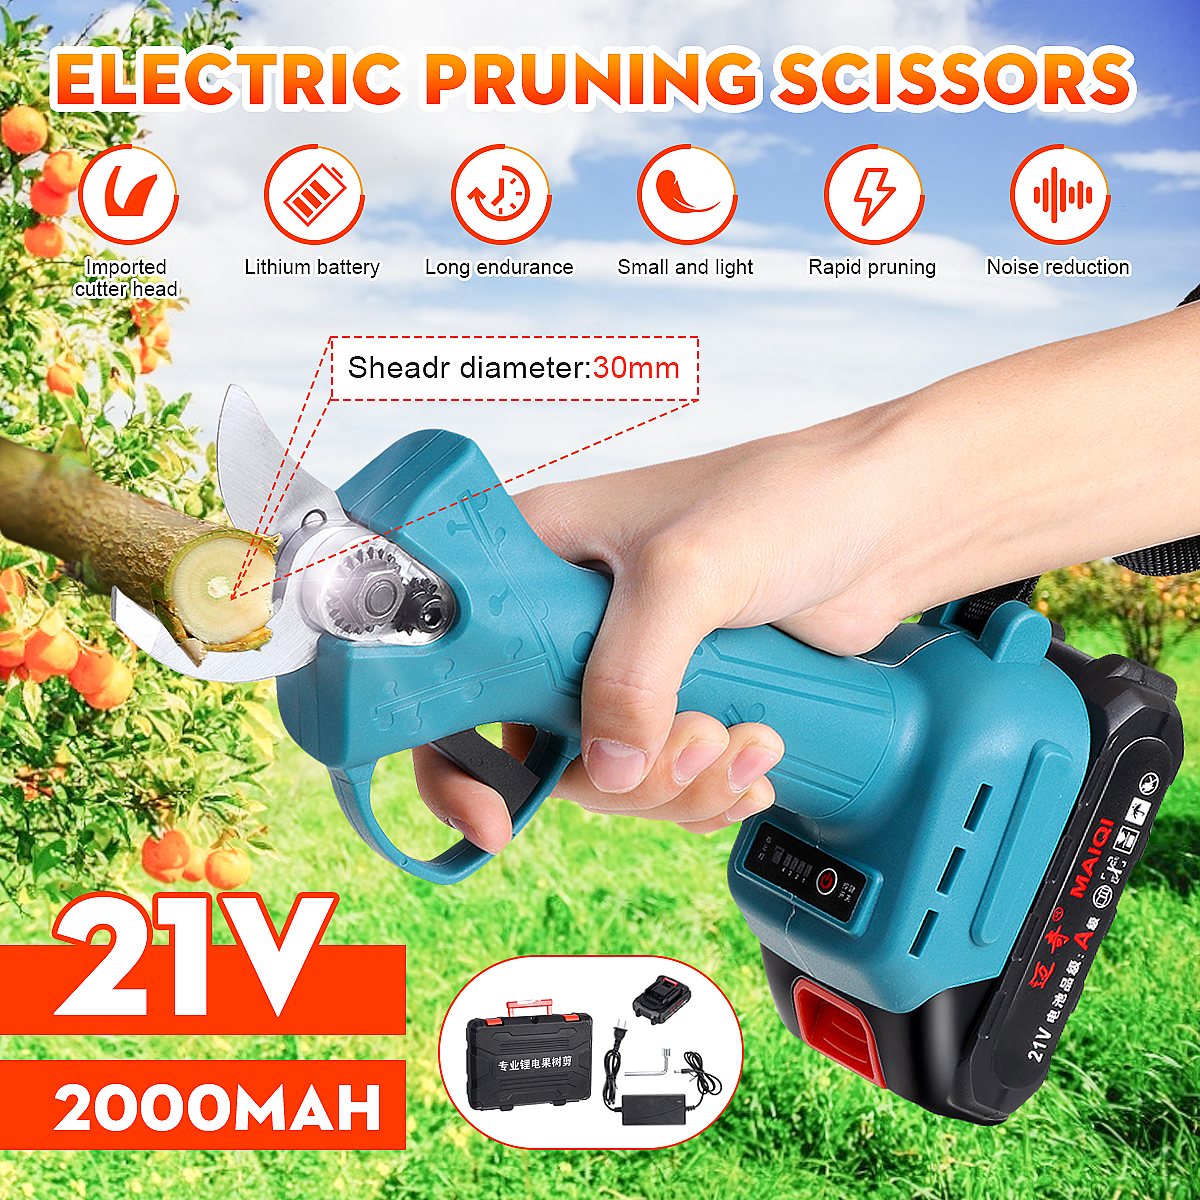 21V-Wireless-Rechargeable-Electric-Pruning-Scissors-Branch-Cutter-Garden-Tool-W-Battery-1743321-1